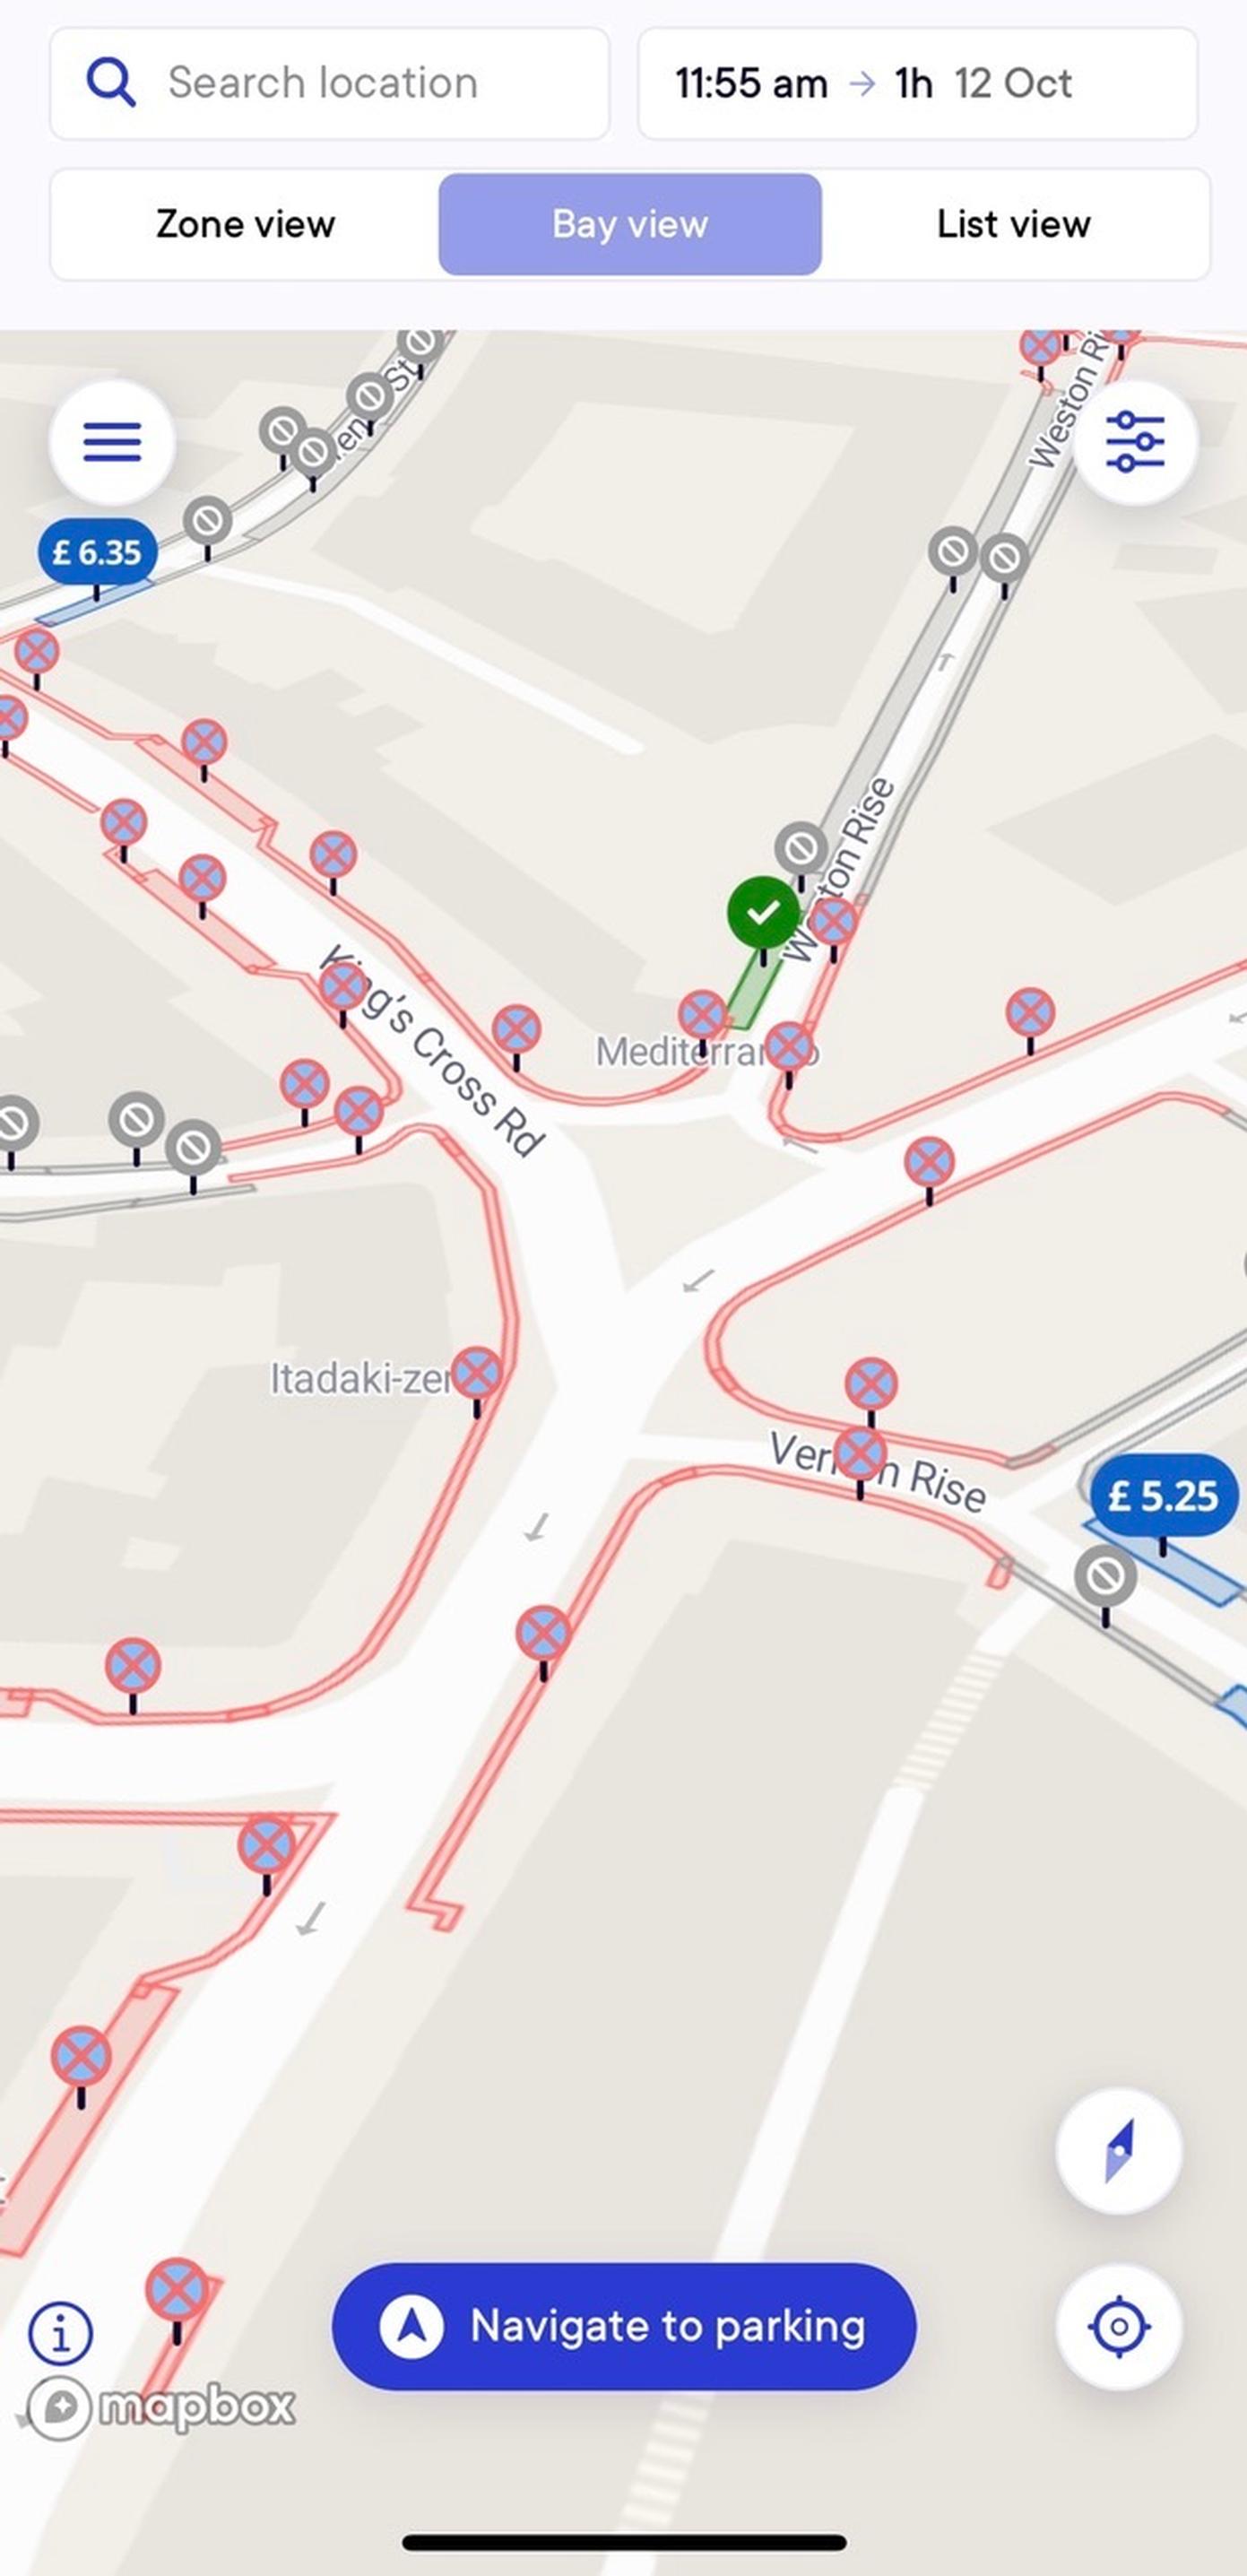 TfL shares Red Route restriction data with AppyWay